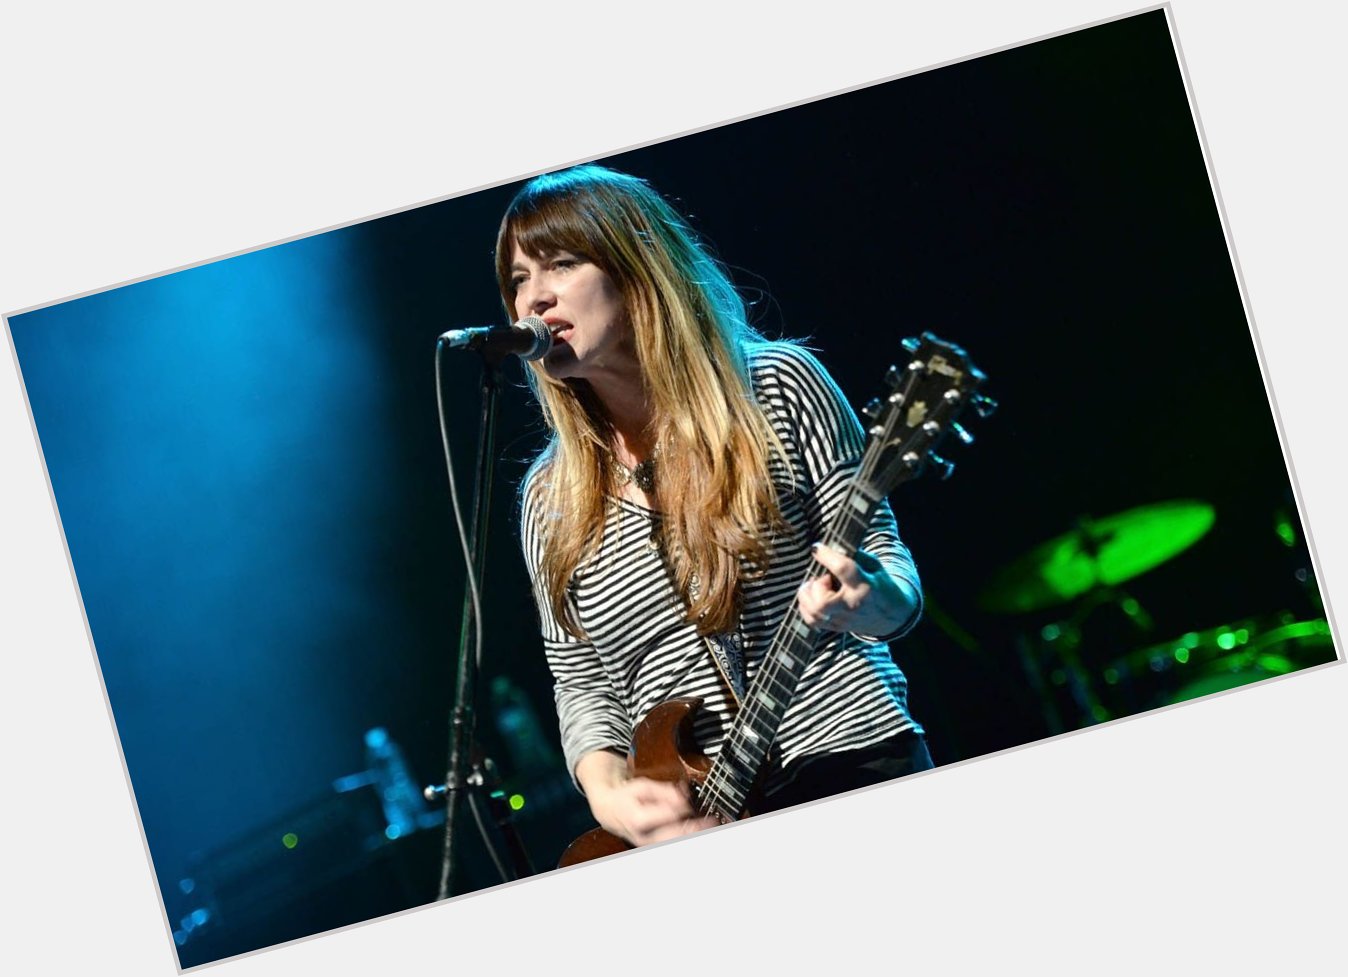 Happy birthday today, as well, to Louise Post of Veruca Salt! 